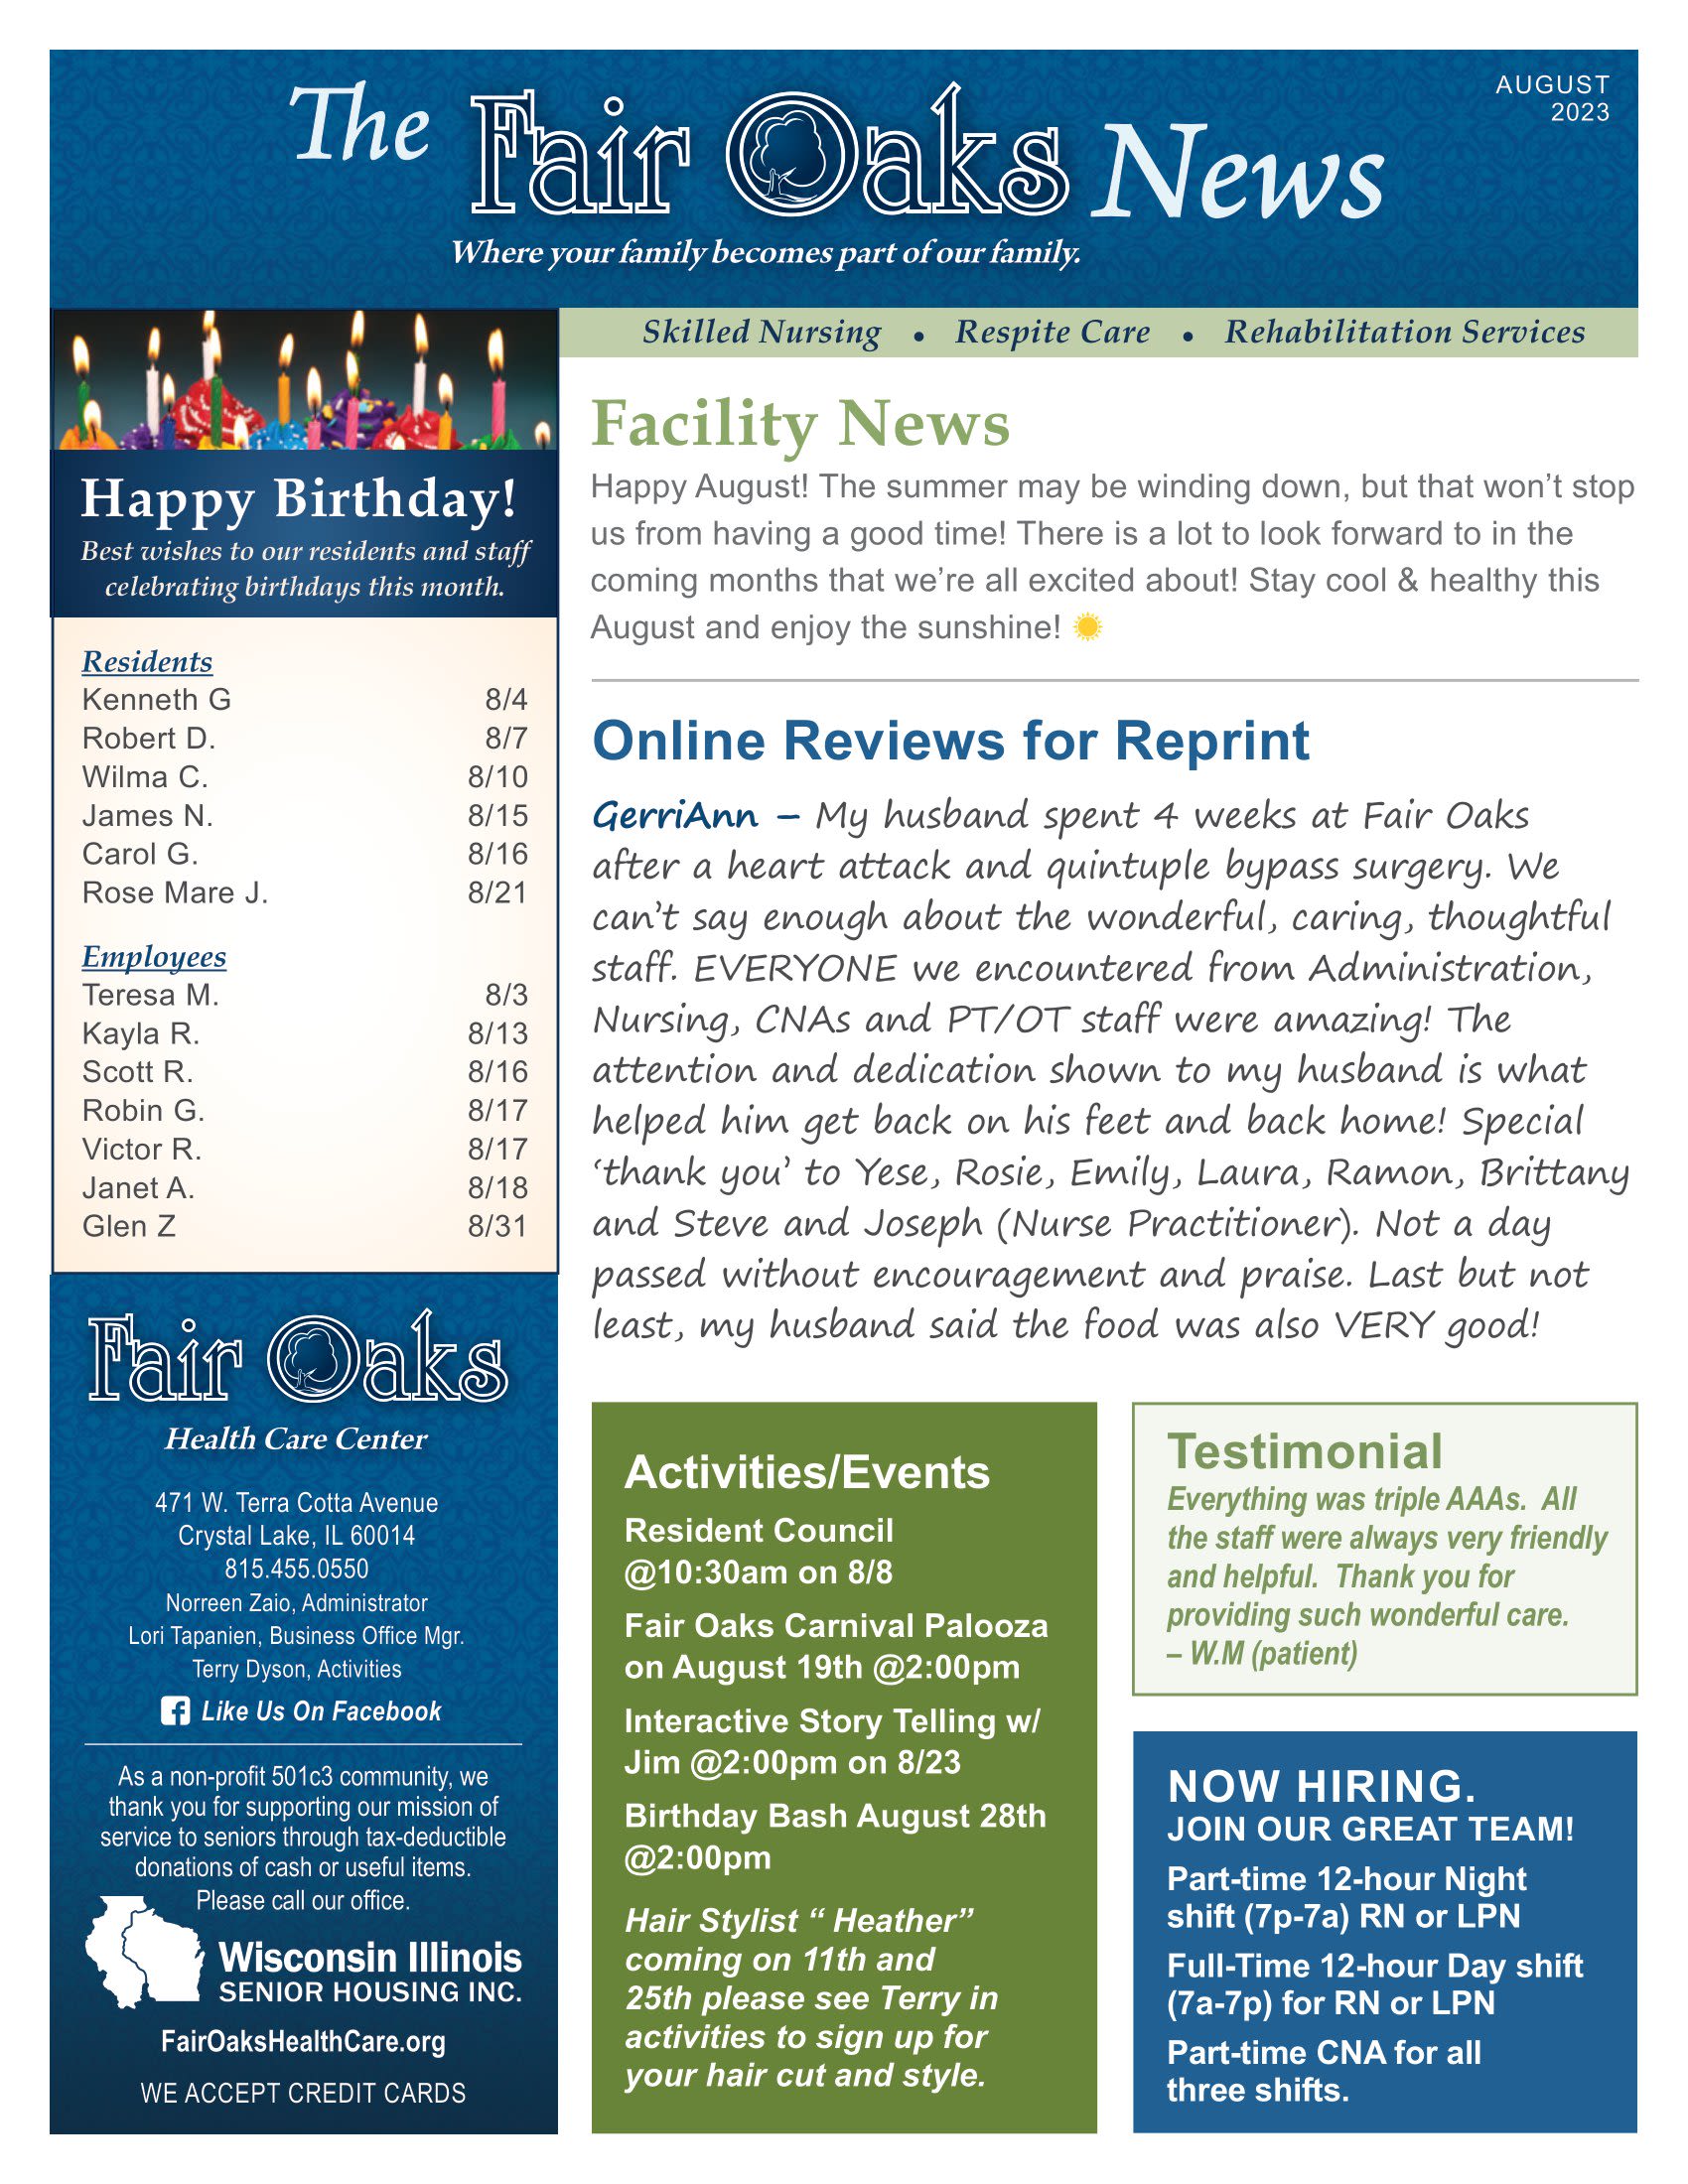 August 2023 Newsletter at Fair Oaks Health Care Center in Crystal Lake, Illinois